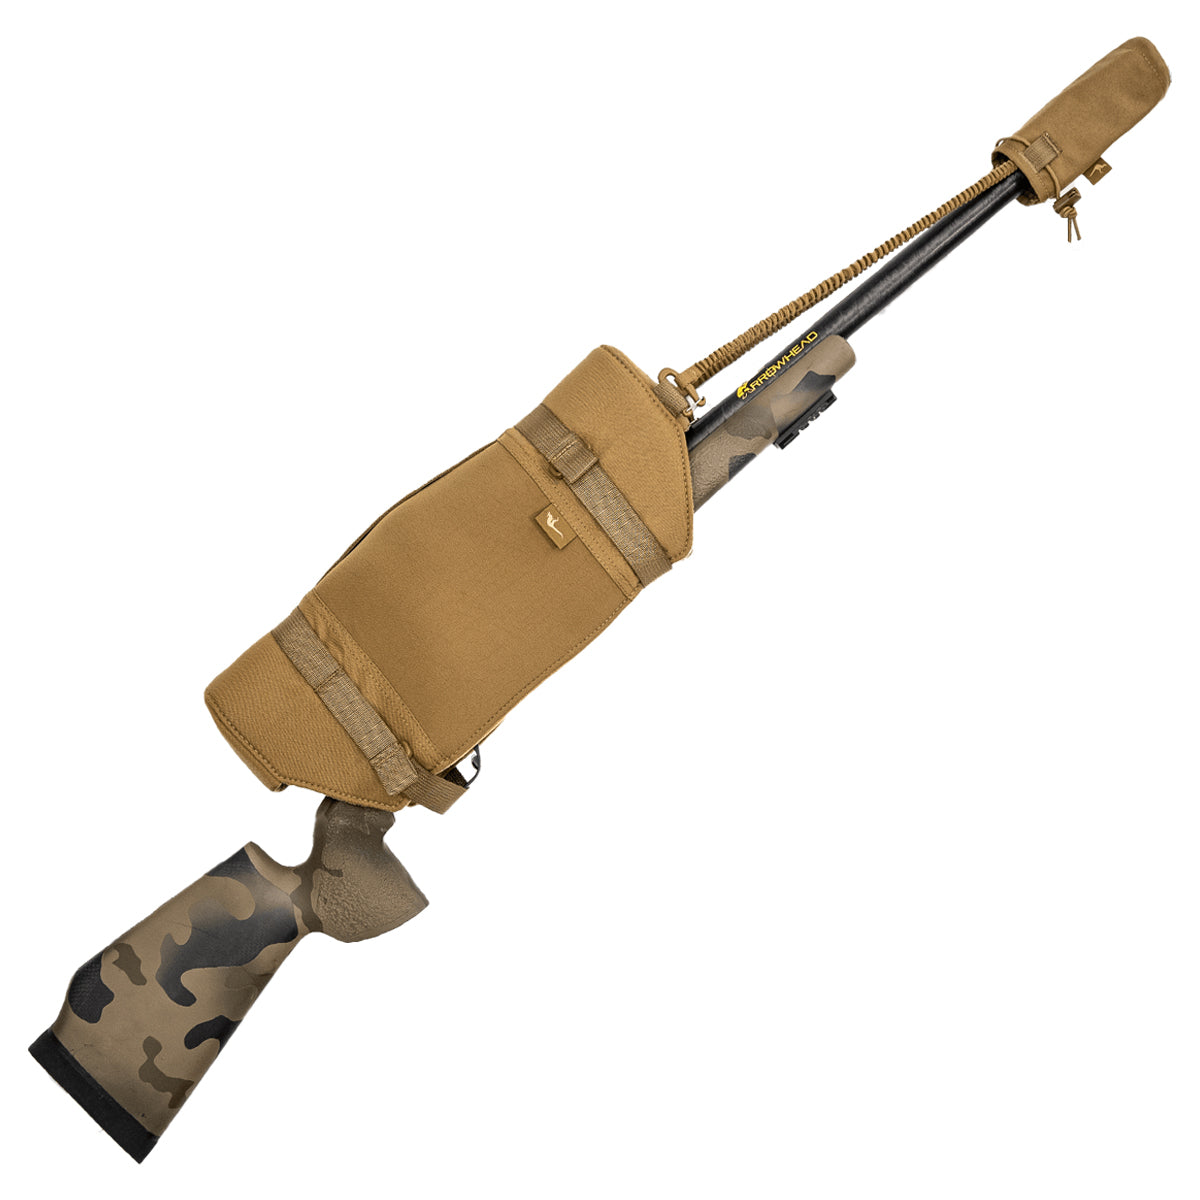 Marsupial Gear Padded Scope and Muzzle Cover